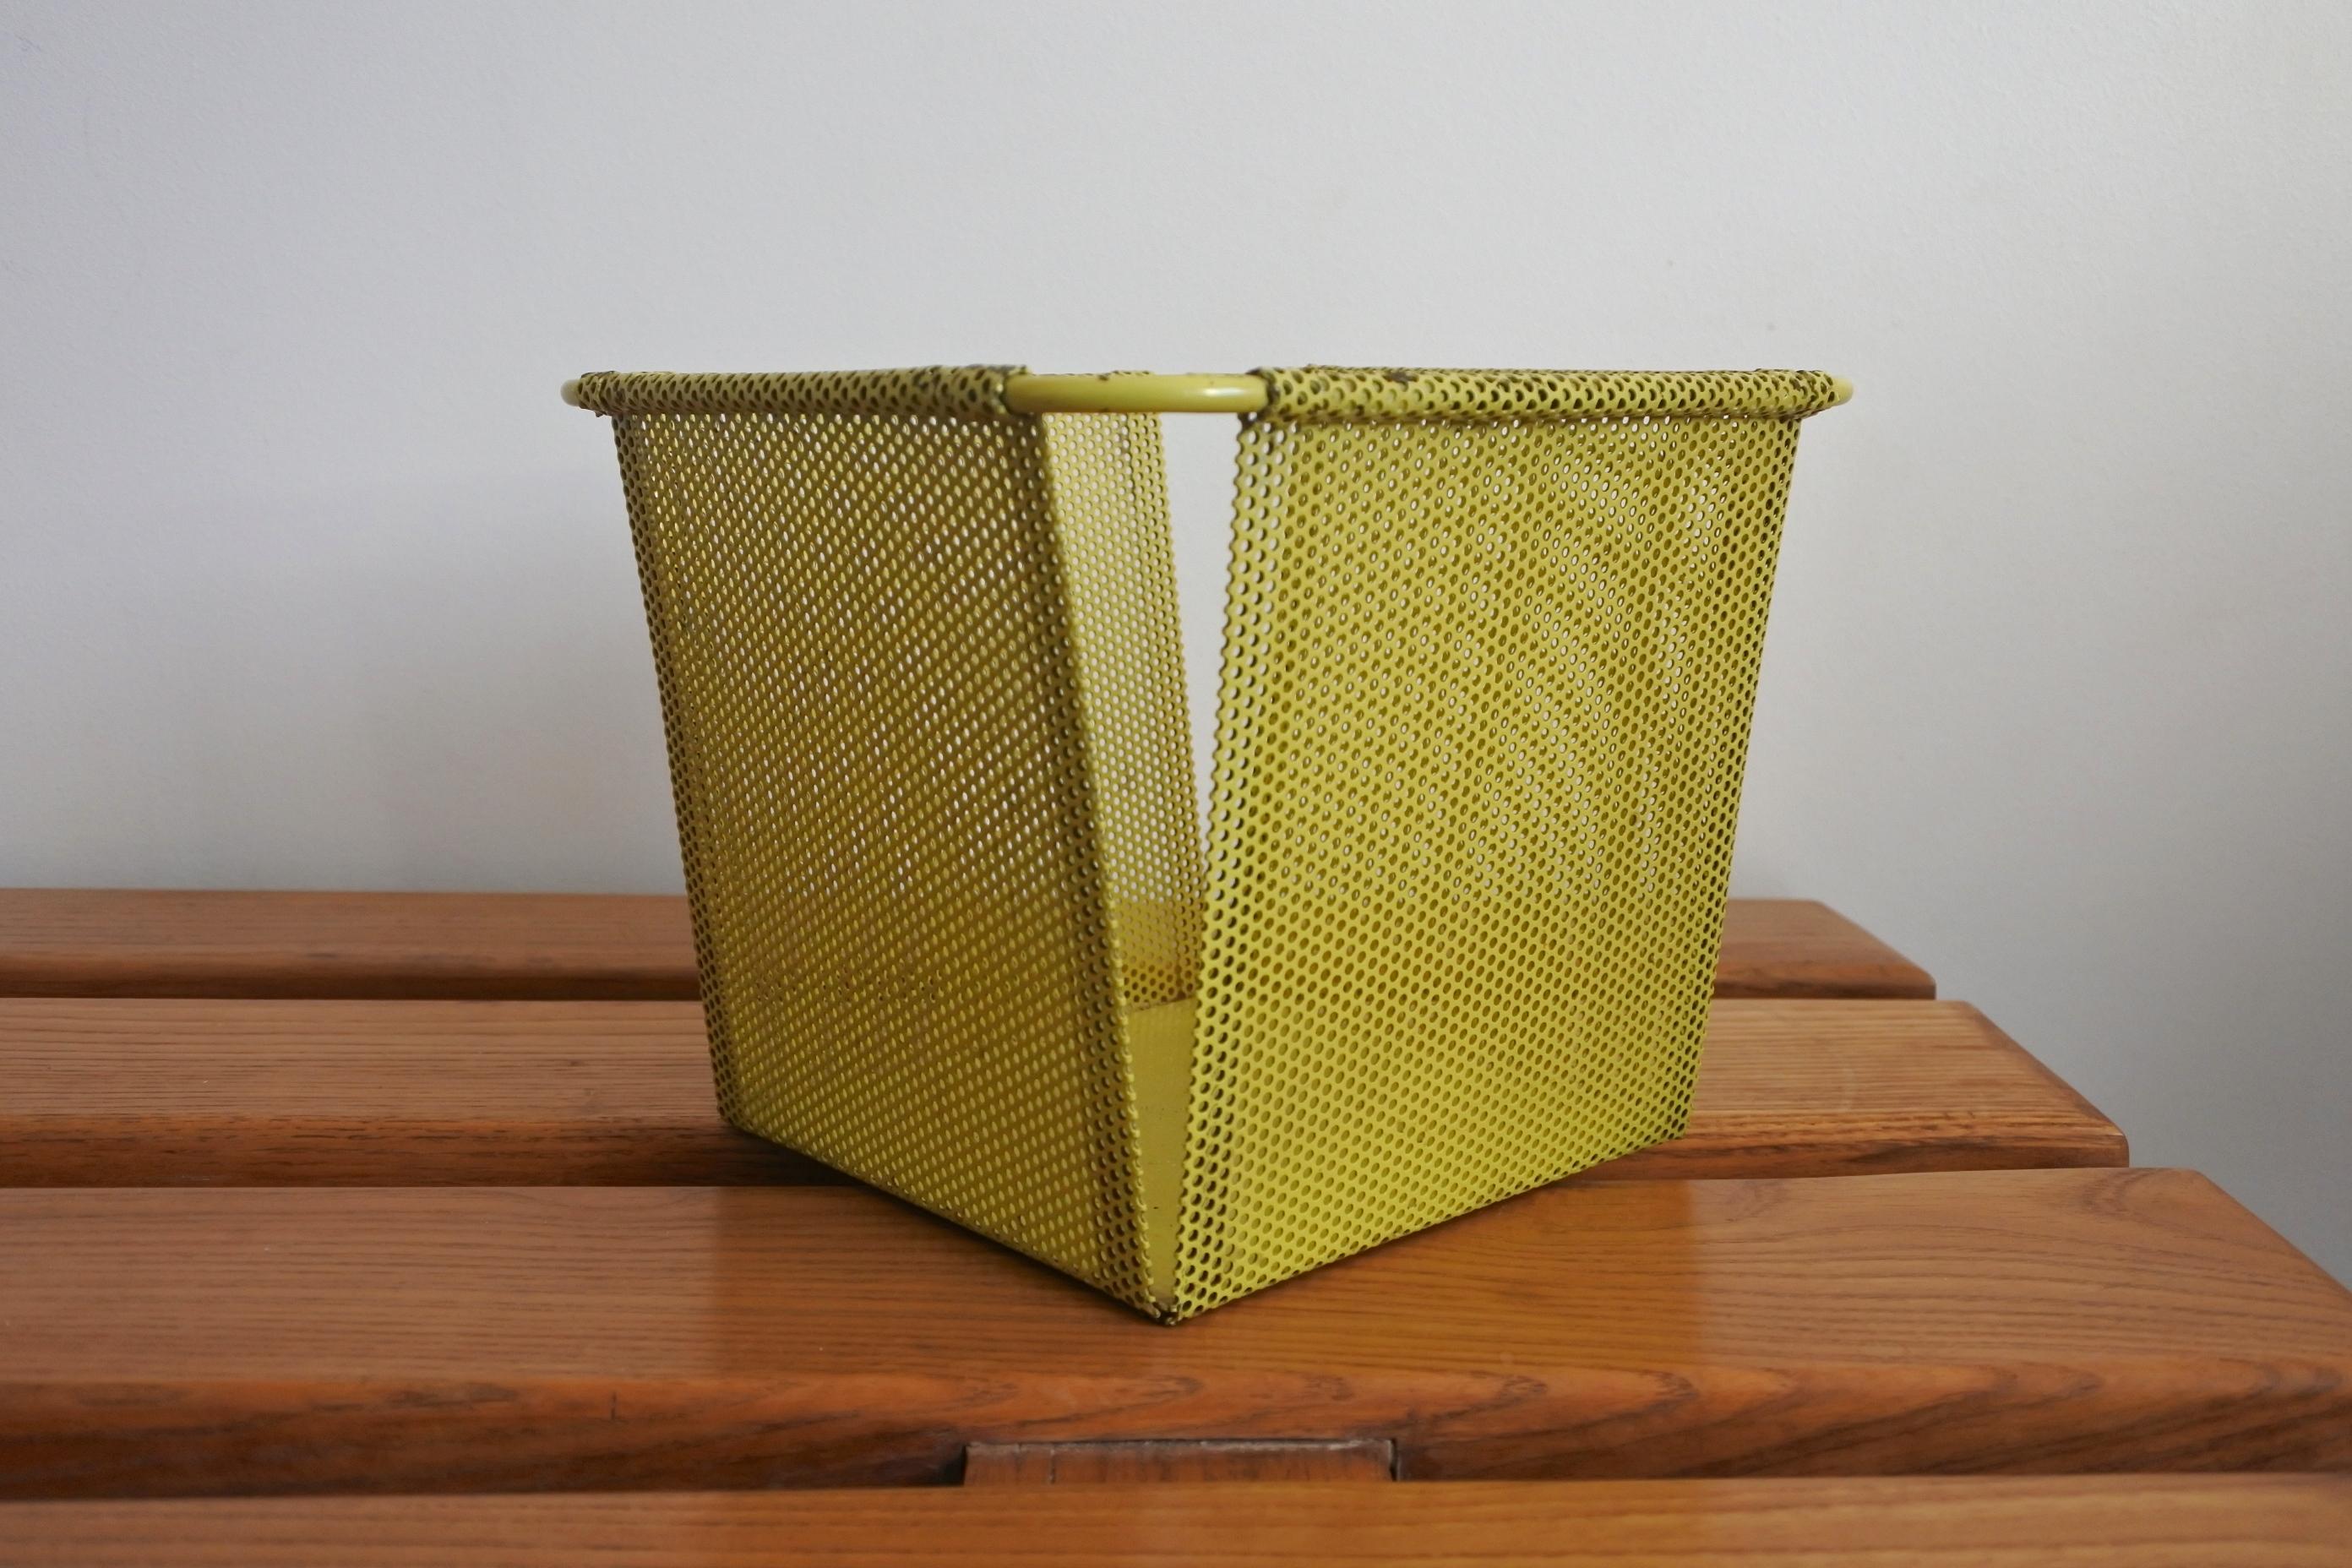 Midcentury planter by French designer Mathieu Mategot.
Yellow lacquered rigitule (perforated metal).
Original lacquer in great condition.
Scarce model,
circa 1953
Literature: 